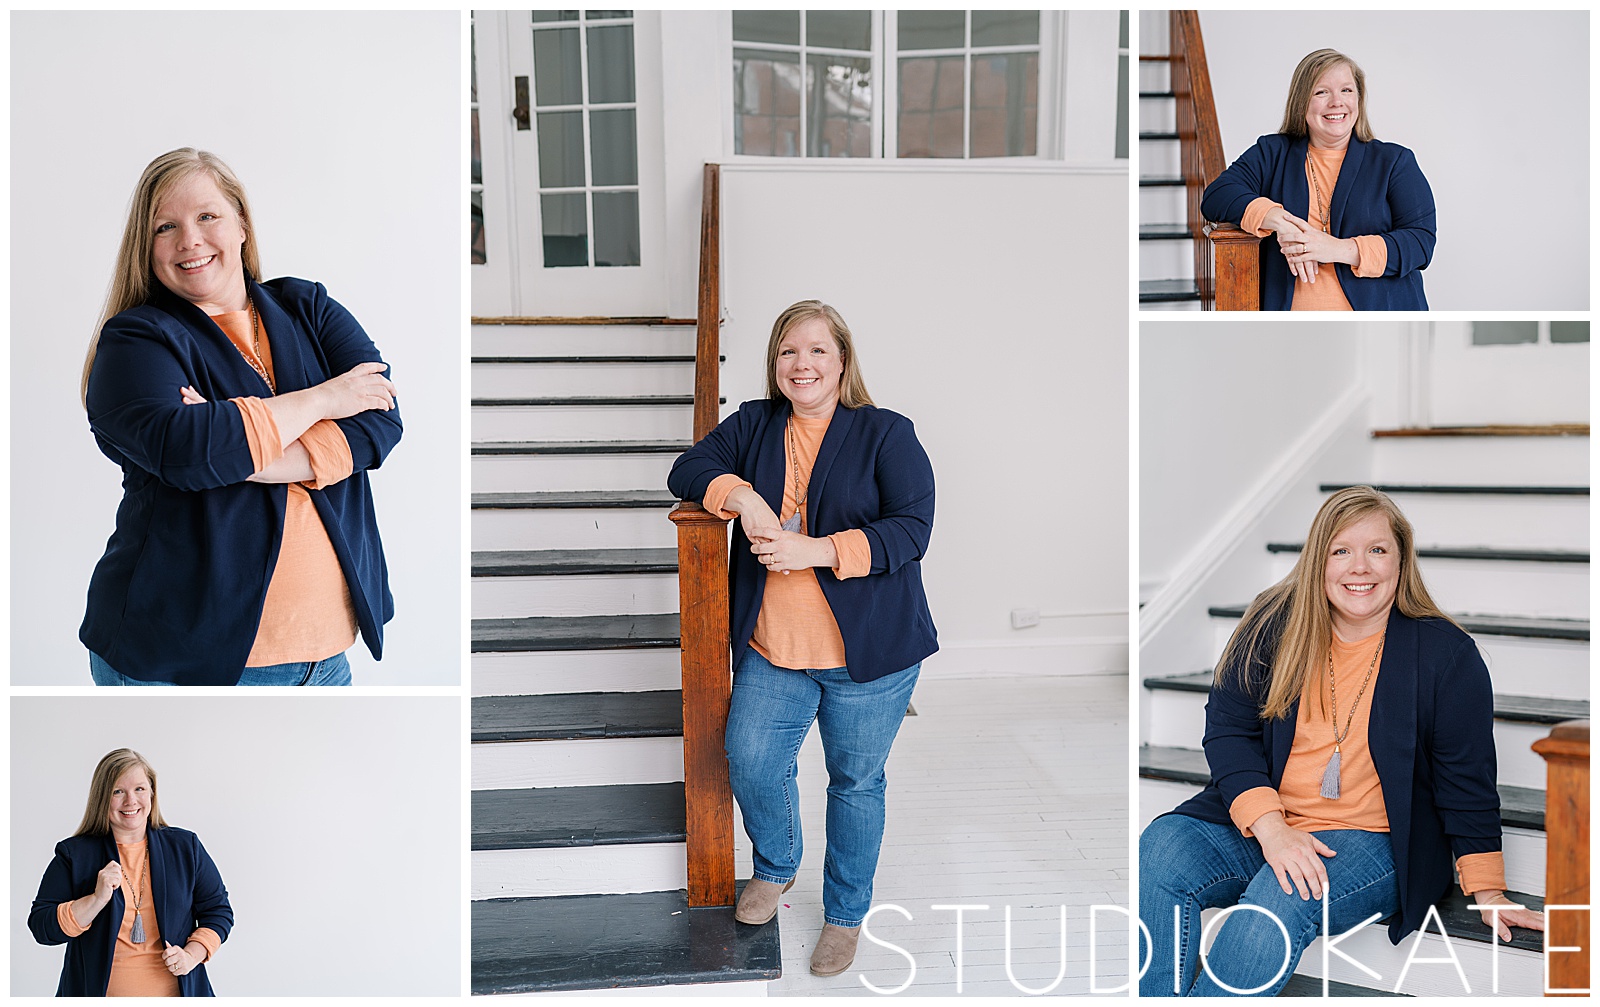 personal brand photographer, personal brand photography, creative brand photography, small business photographer, podcast brand session, blogger brand photographer